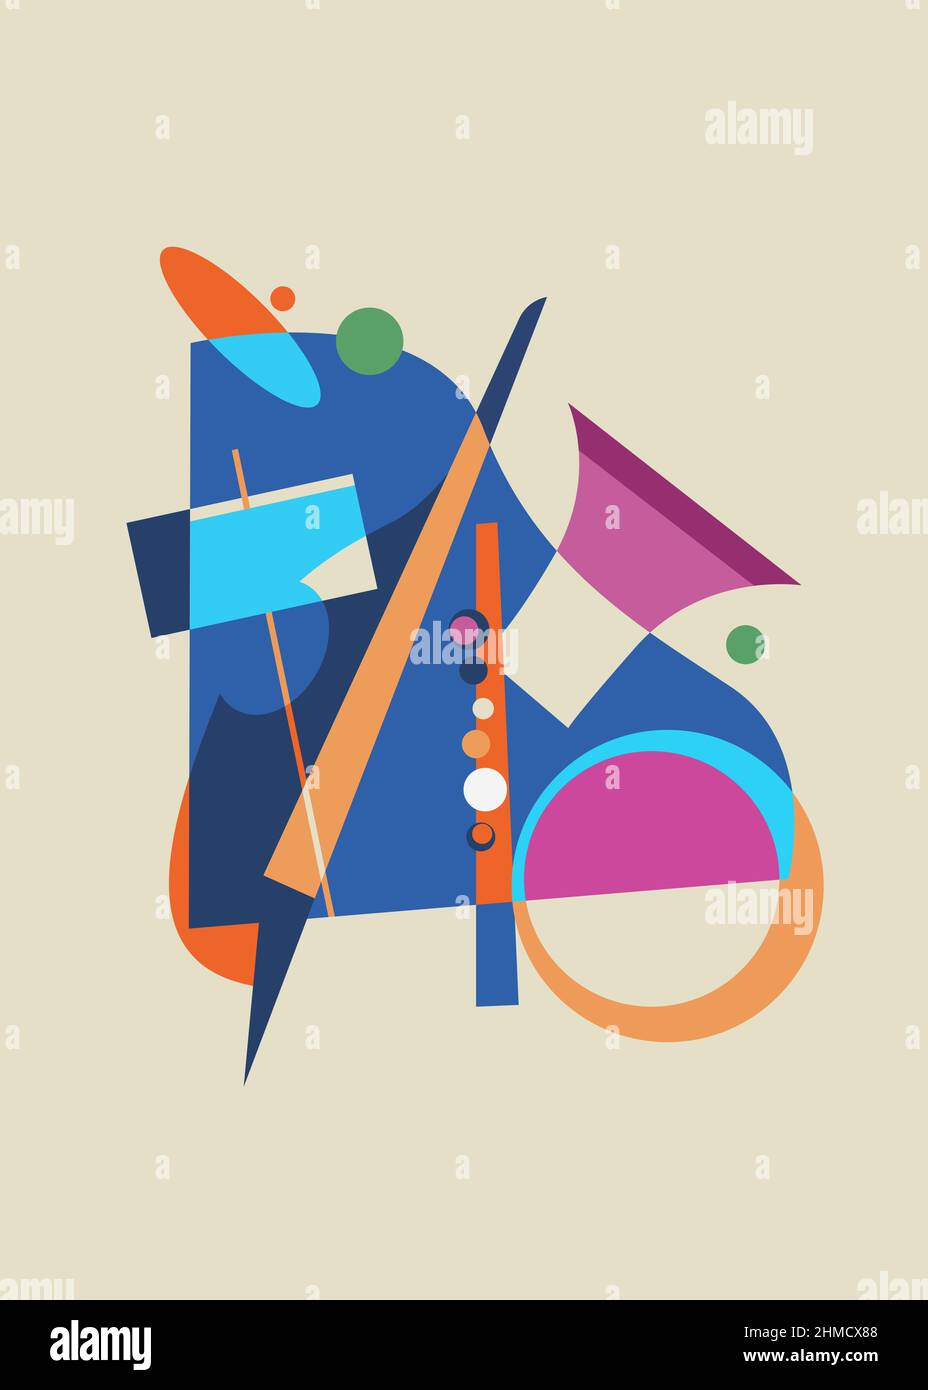 Abstract illustration with musical instruments. Jazz poster design. Stock Vector